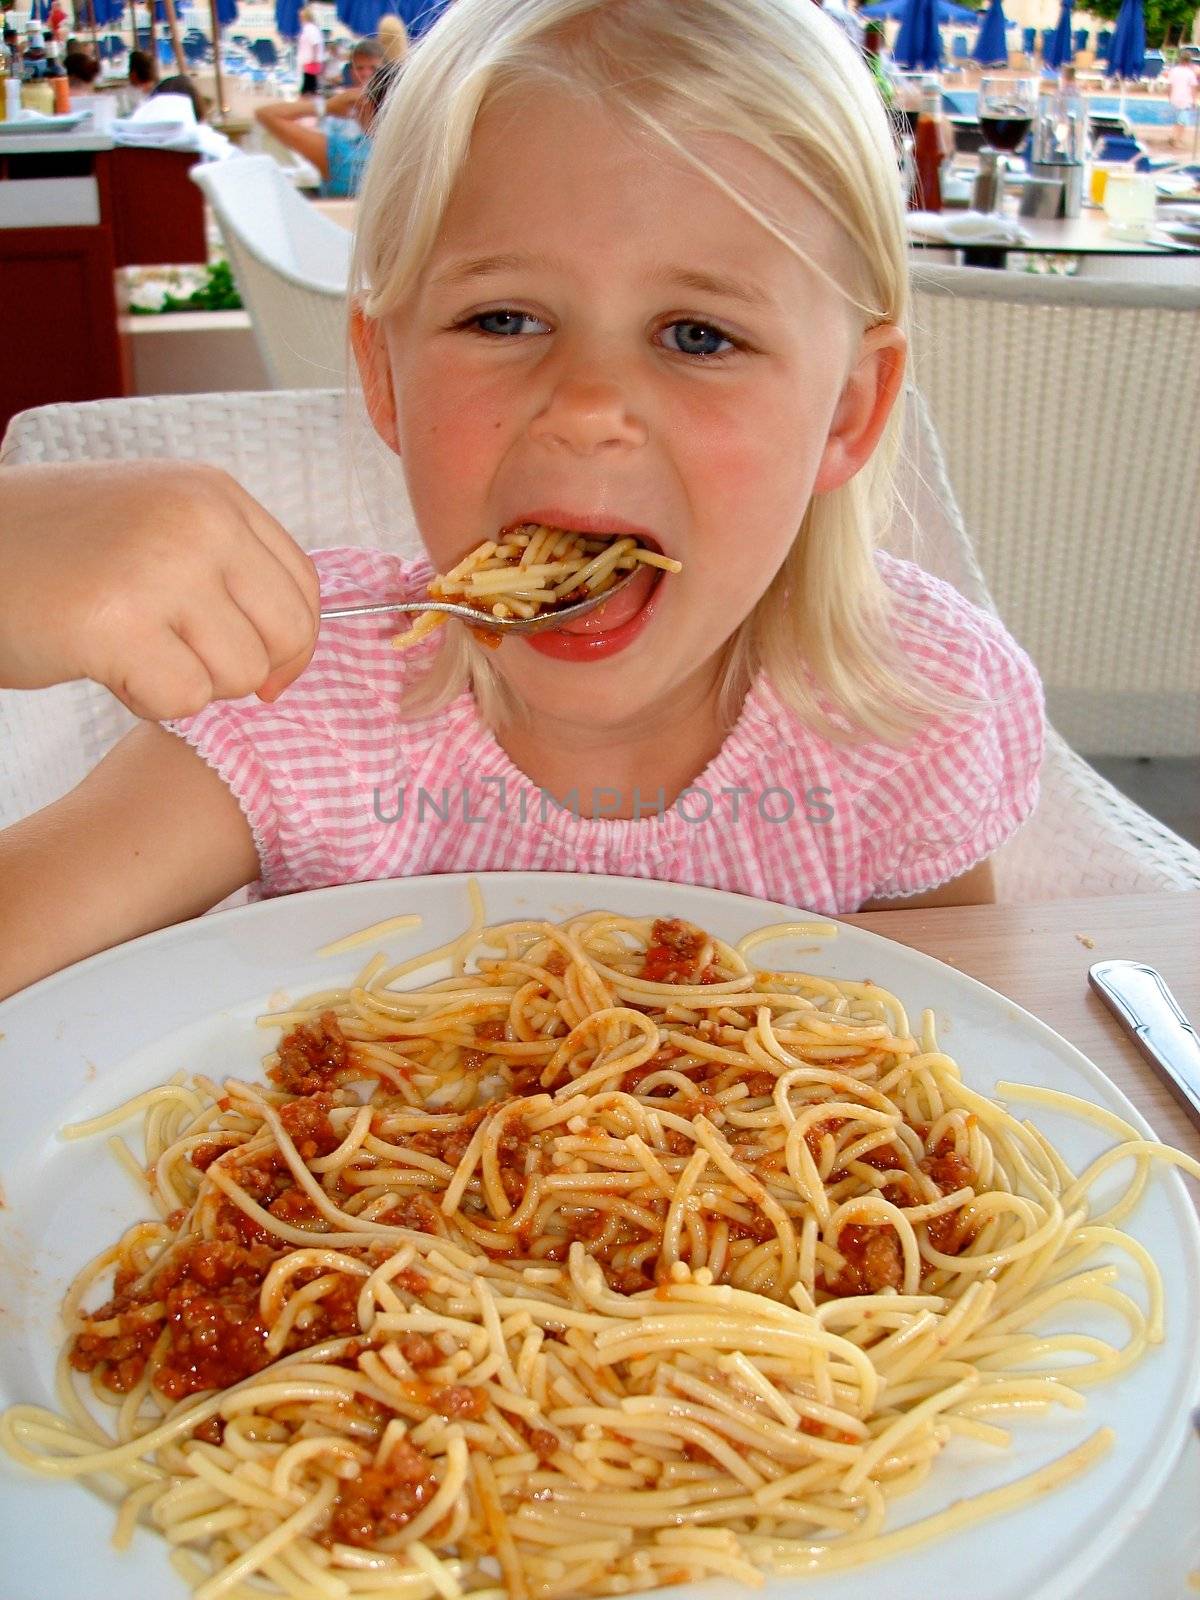 little girl eating noodles. Please note: No negative use allowed.